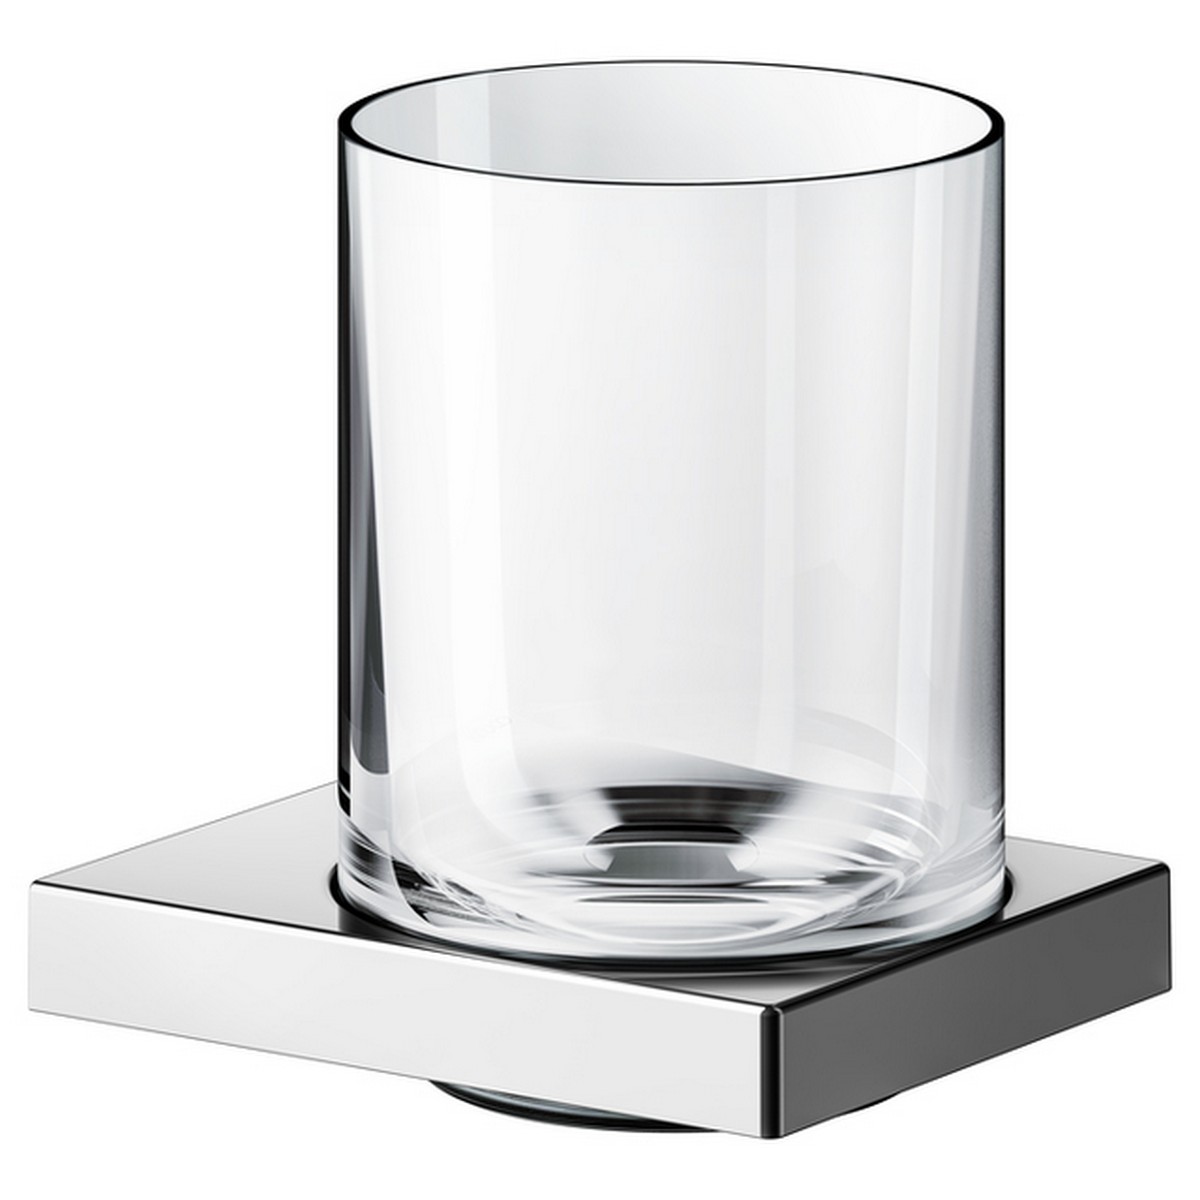 KEUCO 19150019000 EDITION 90 SQUARE 3 3/8 INCH WALL MOUNTED TUMBLER HOLDER IN POLISHED CHROME